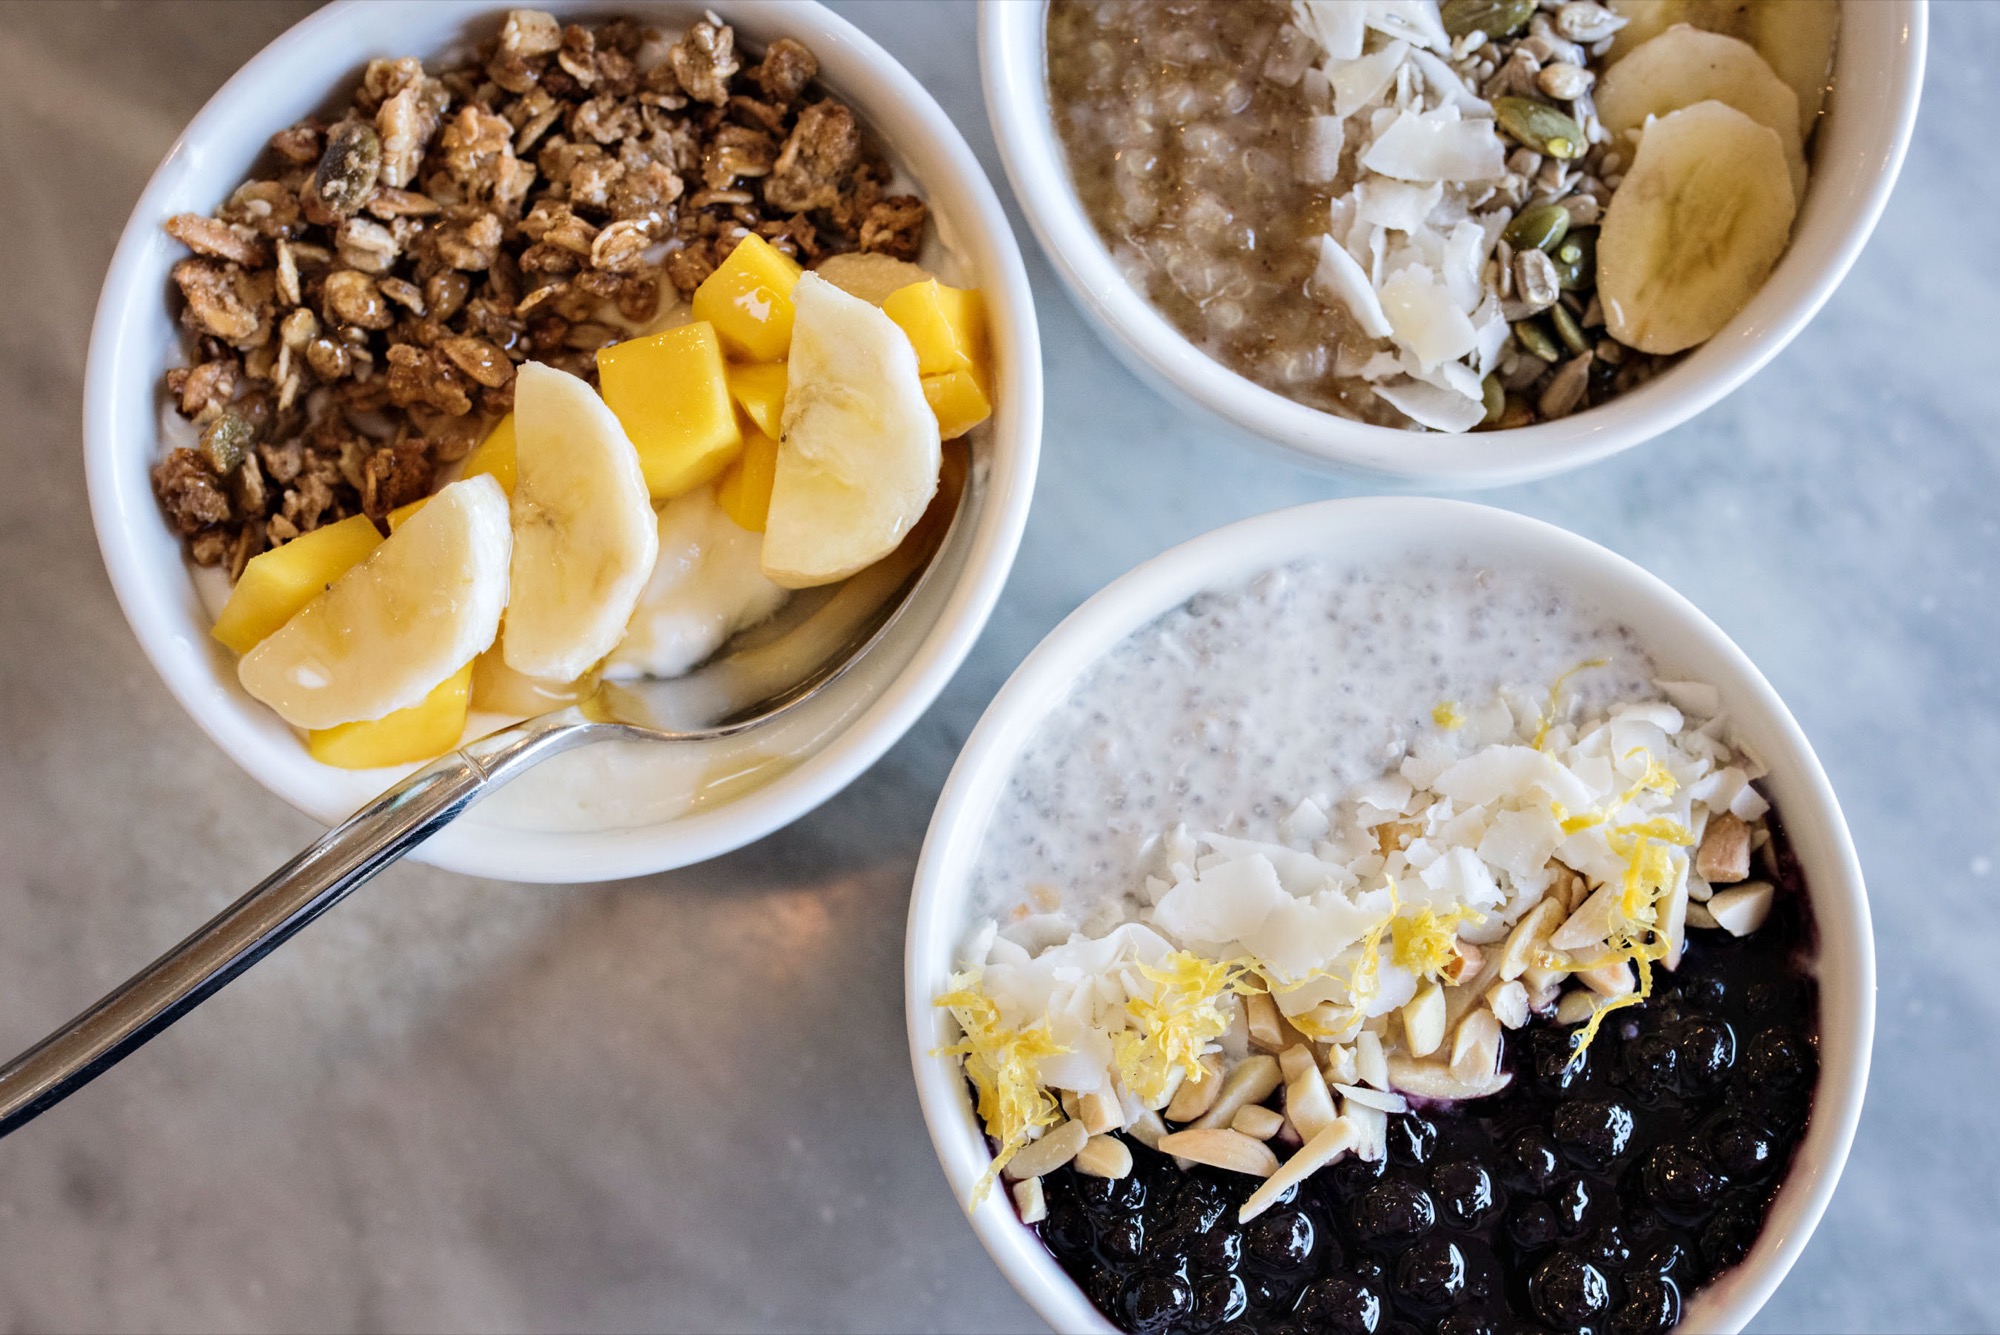 L to R: Müsli B with seasonal fruit / Quinoa Porridge with coconut flakes, toasted seeds and banana / Coconut Chia Seed Pudding with coconut flakes, crushed almonds, and blueberry-lemon compote / Photo by D'Ann McCormick Boal